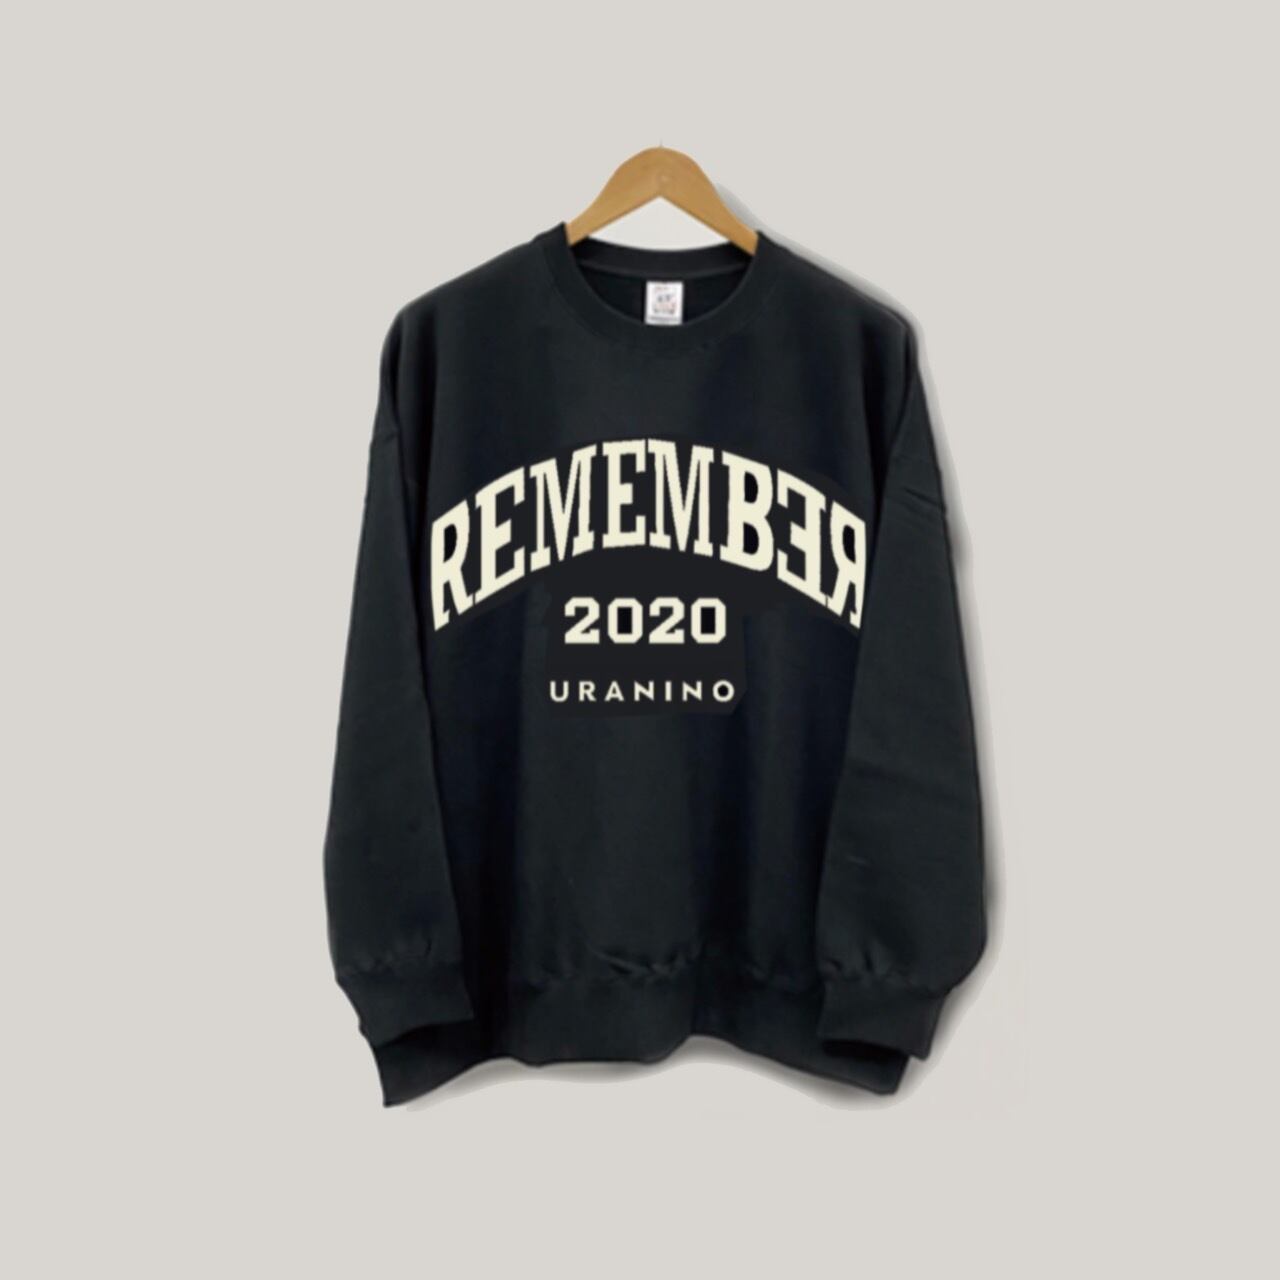 REMEMBER 2020 スウェット | ウラニーノ powered by BASE